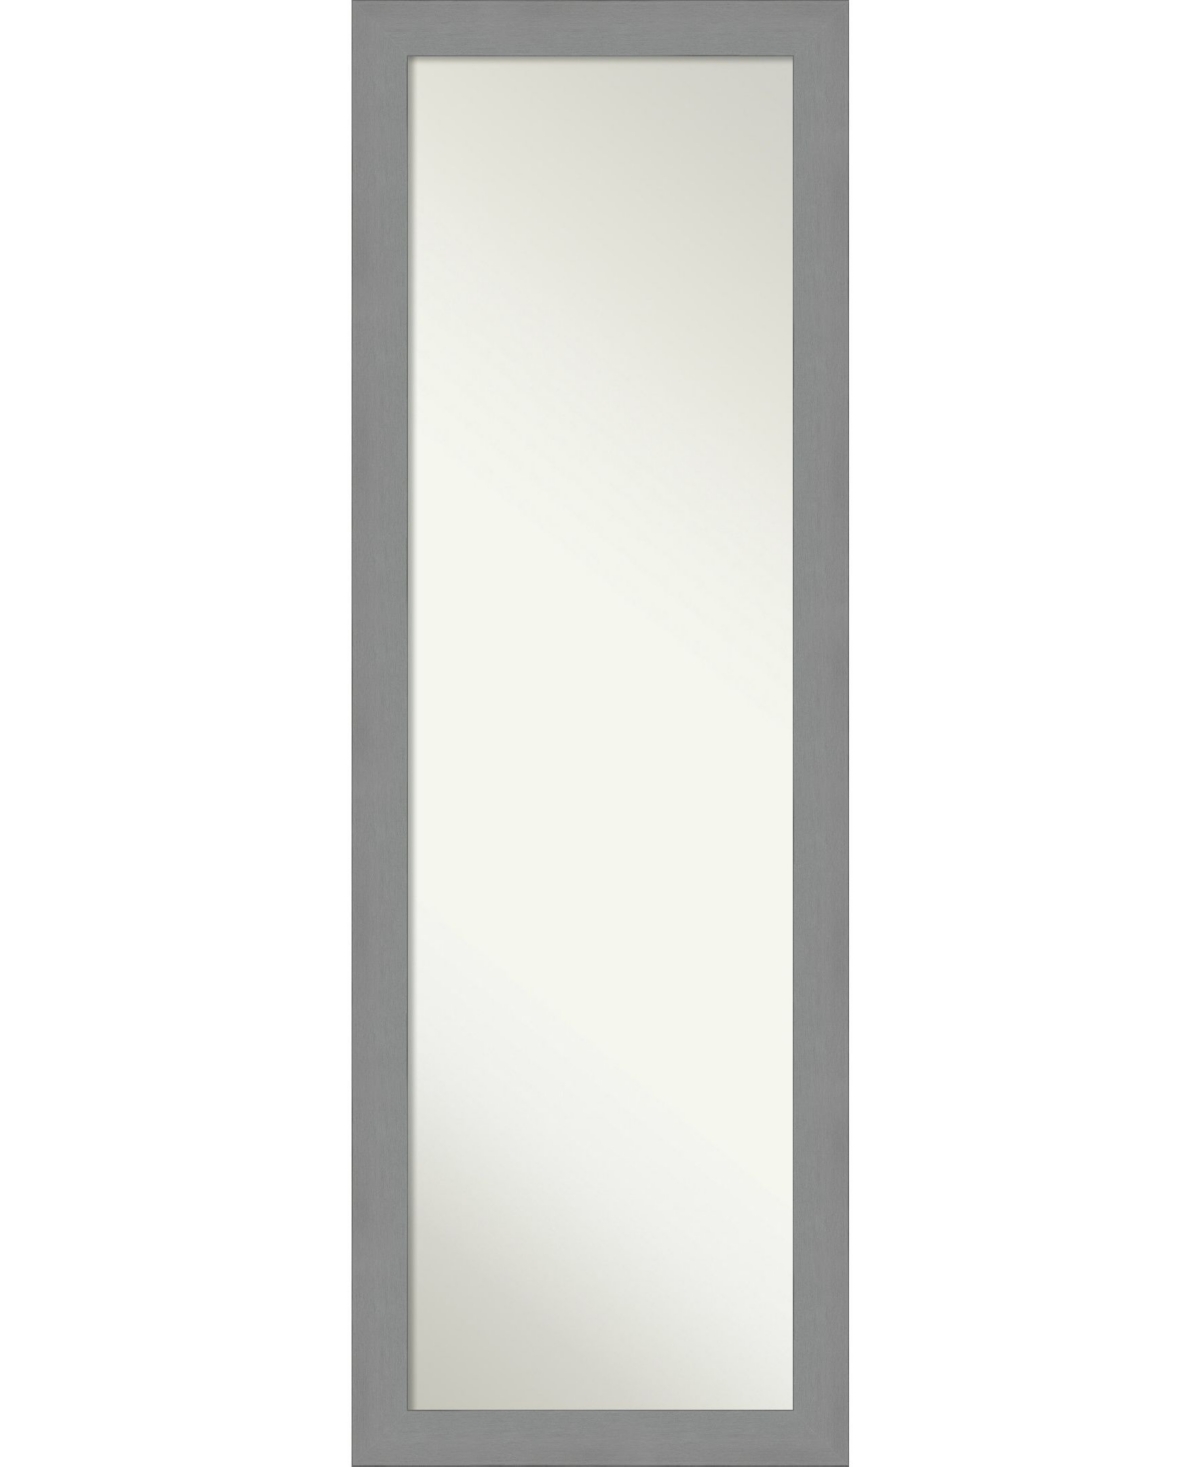 Brushed on The Door Full Length Mirror, 17.5" x 51.50" - Silver